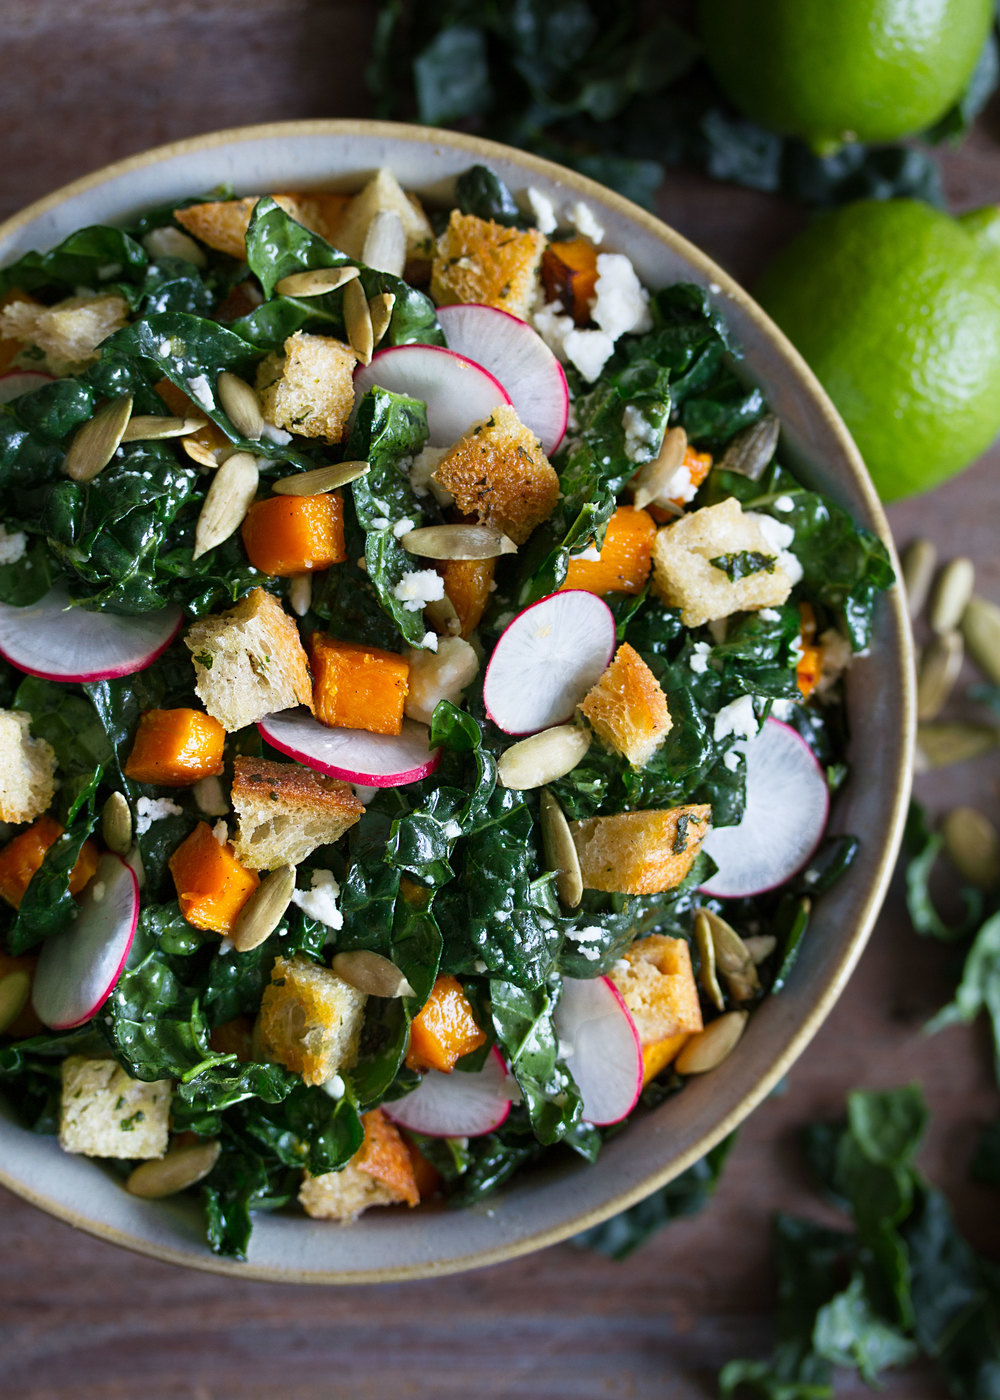 Mexican kale salad with butternut squash and croutons